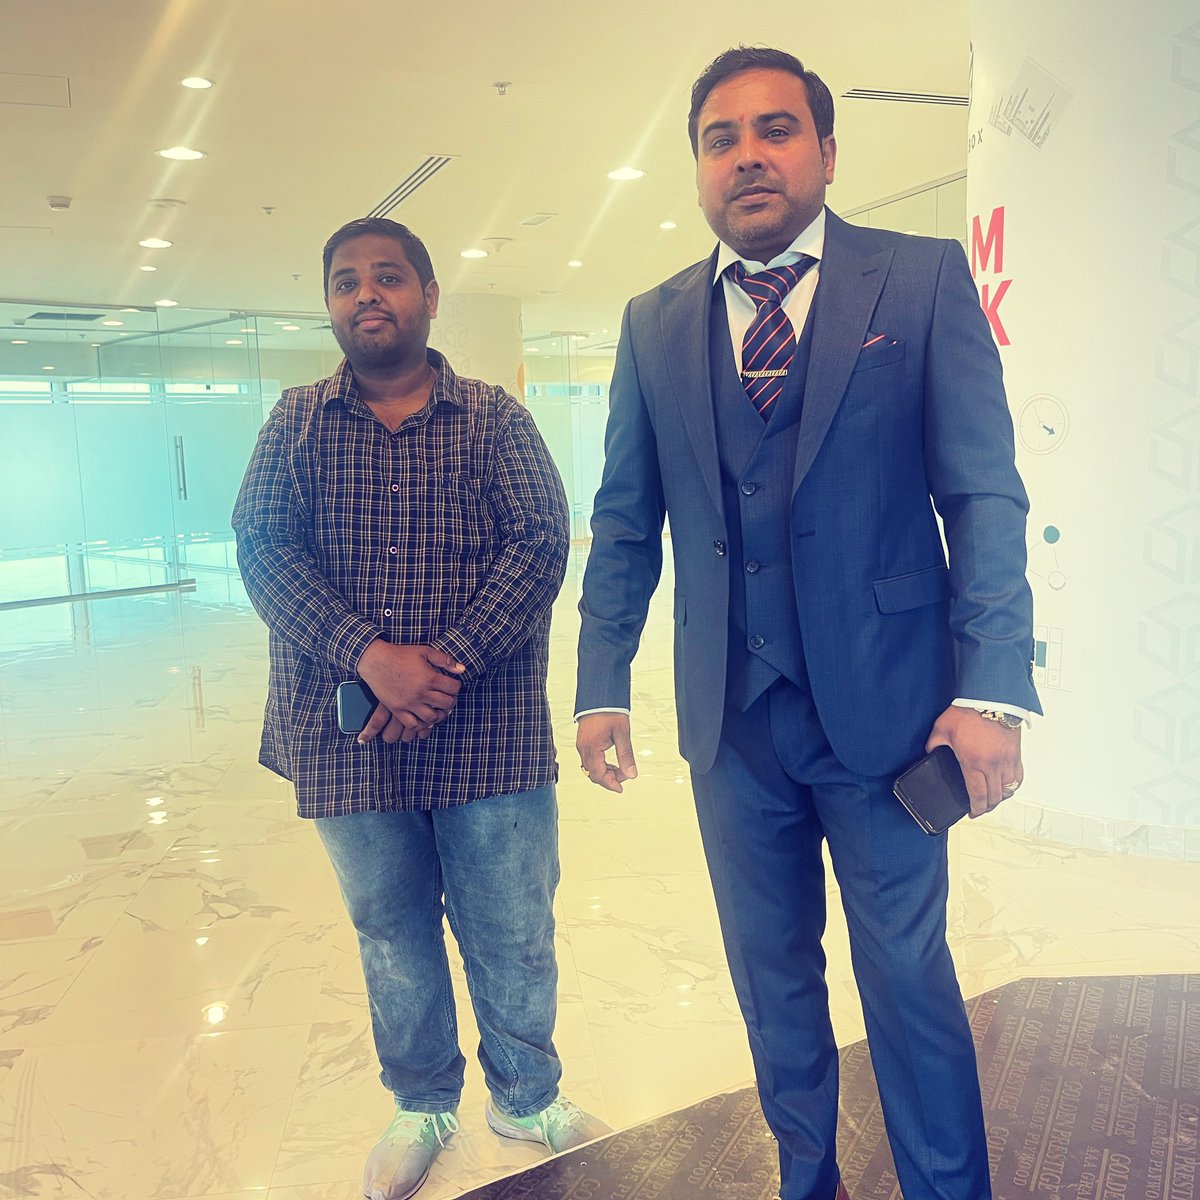 Millionaire program meeting with Mr Opesh Singh at our Dubai office. Mr Kshitij Verma ji come to meet Mr Singh for his overseas business expansion. Call/ WhatsApp +91-8094607111. Learn more - opeshsingh.com #opeshsingh #millionaireprogram #dubai #opeshstore #uae🇦🇪